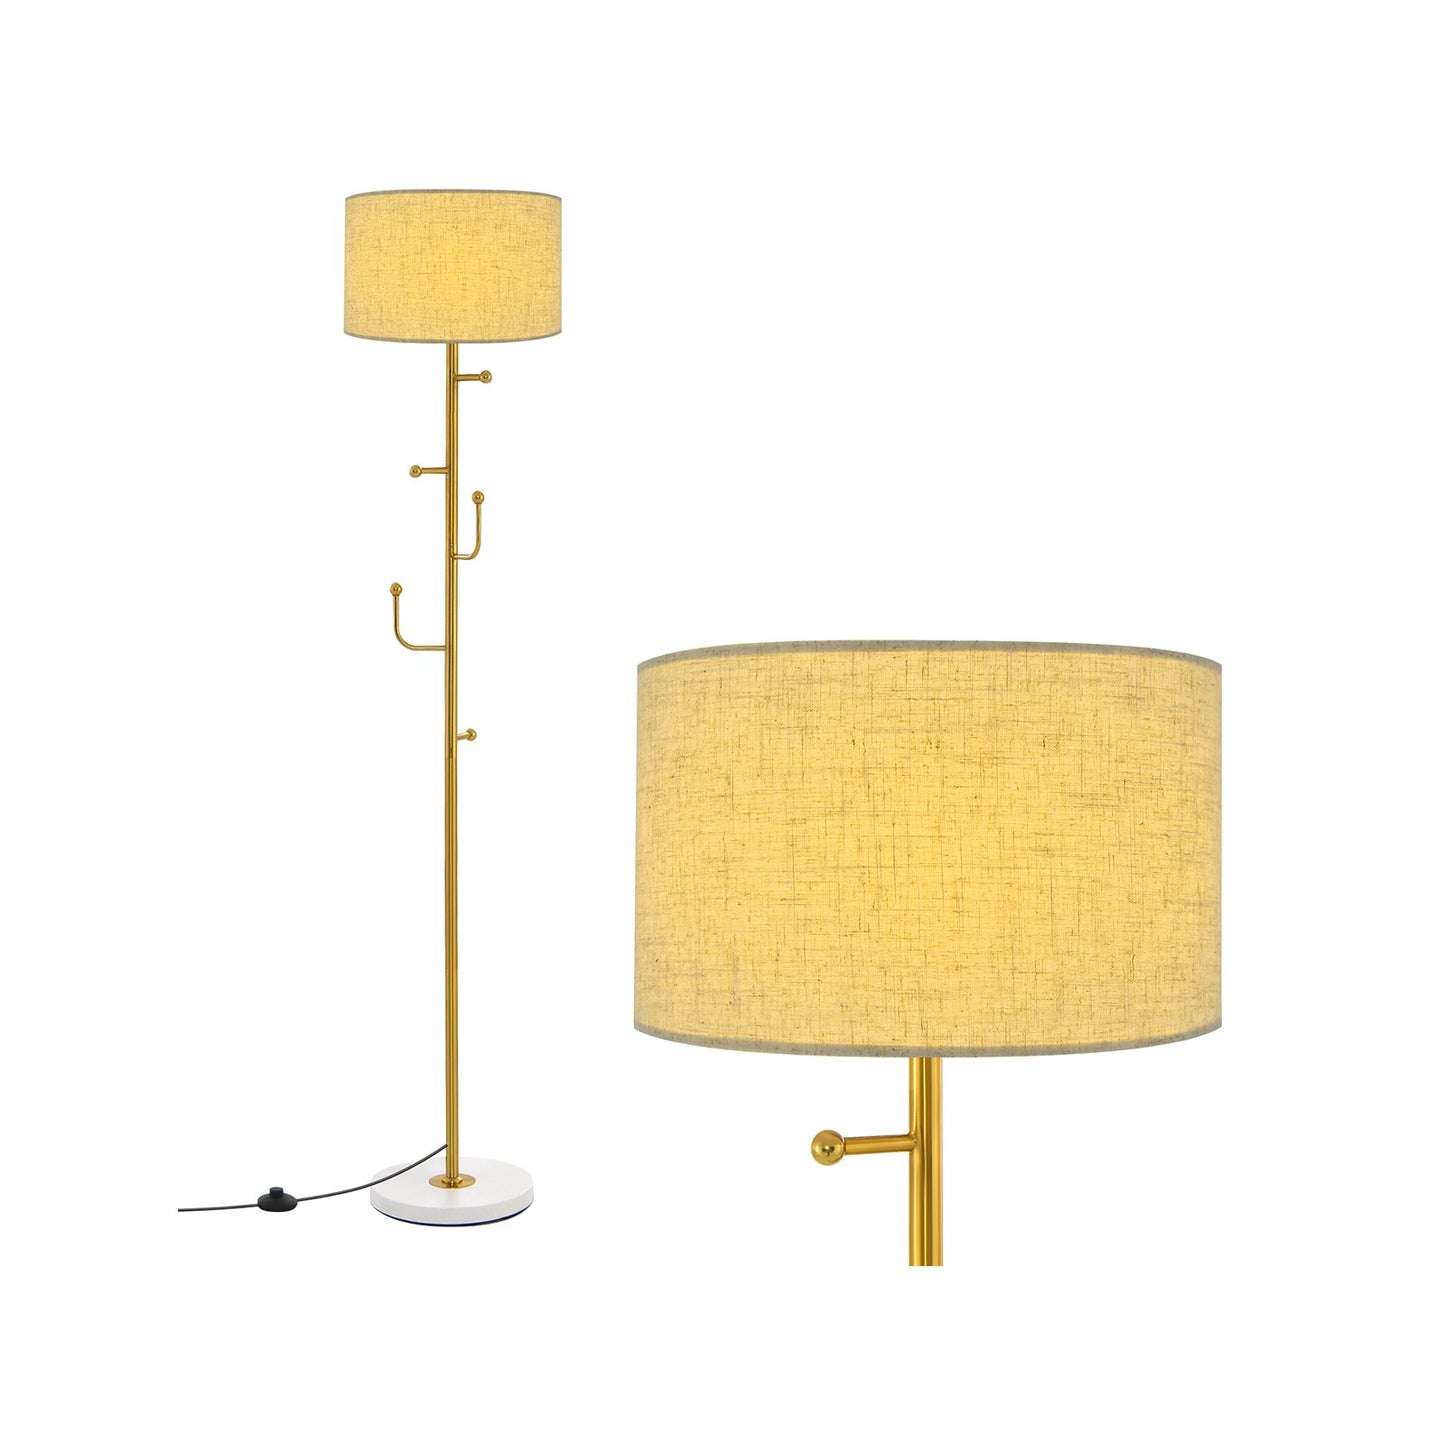 Freestanding Tall Pole Lamp with 5 Hooks and Sturdy Weighted Base, Golden